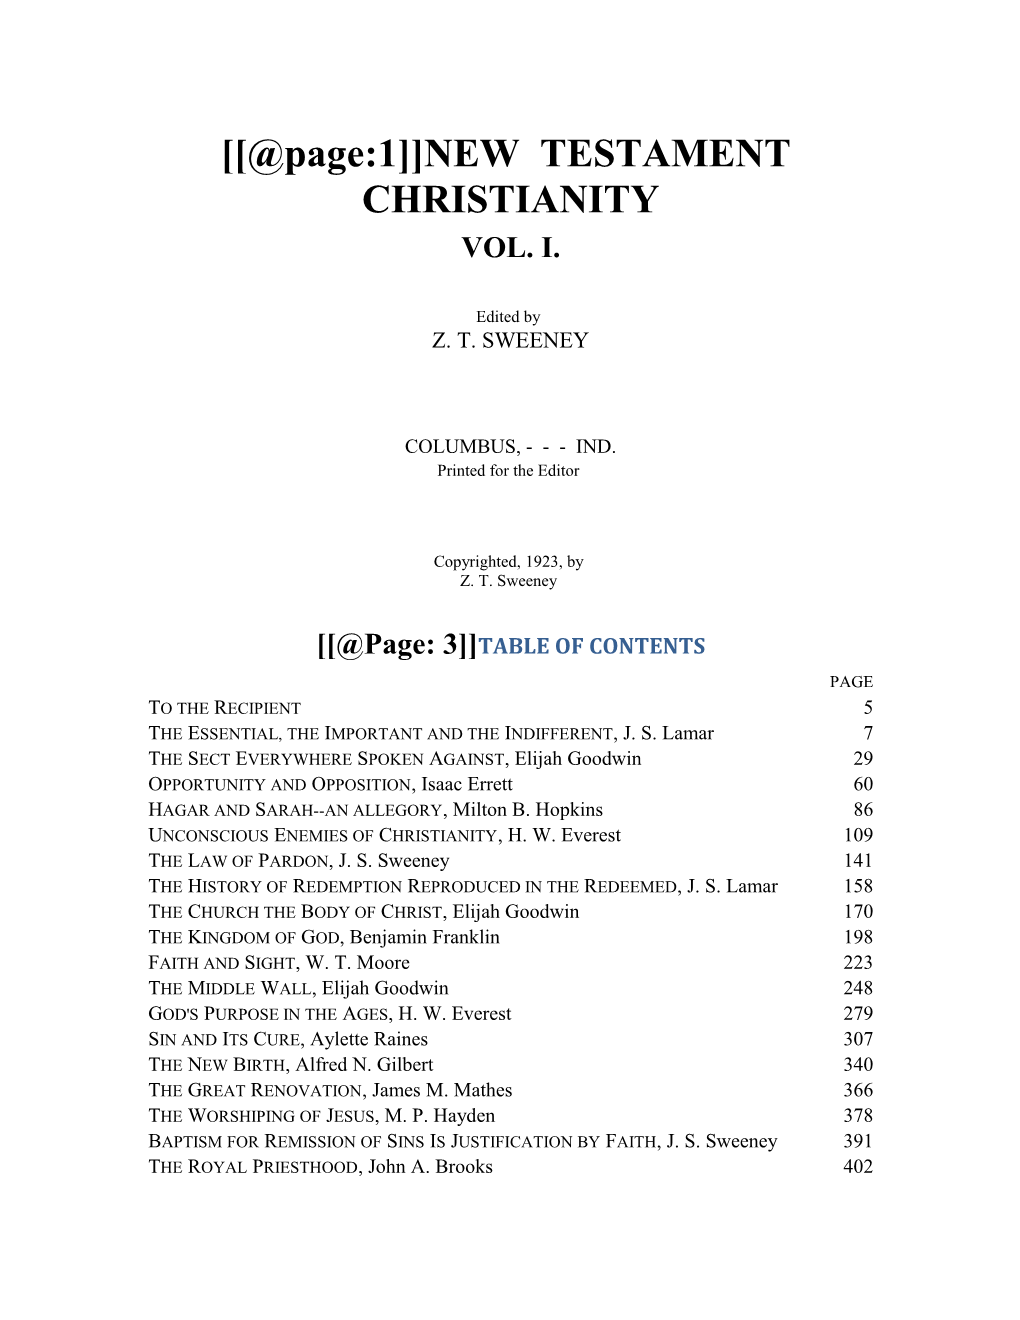 Z. T. Sweeney's New Testament Christianity, Vol. I.: Title Page